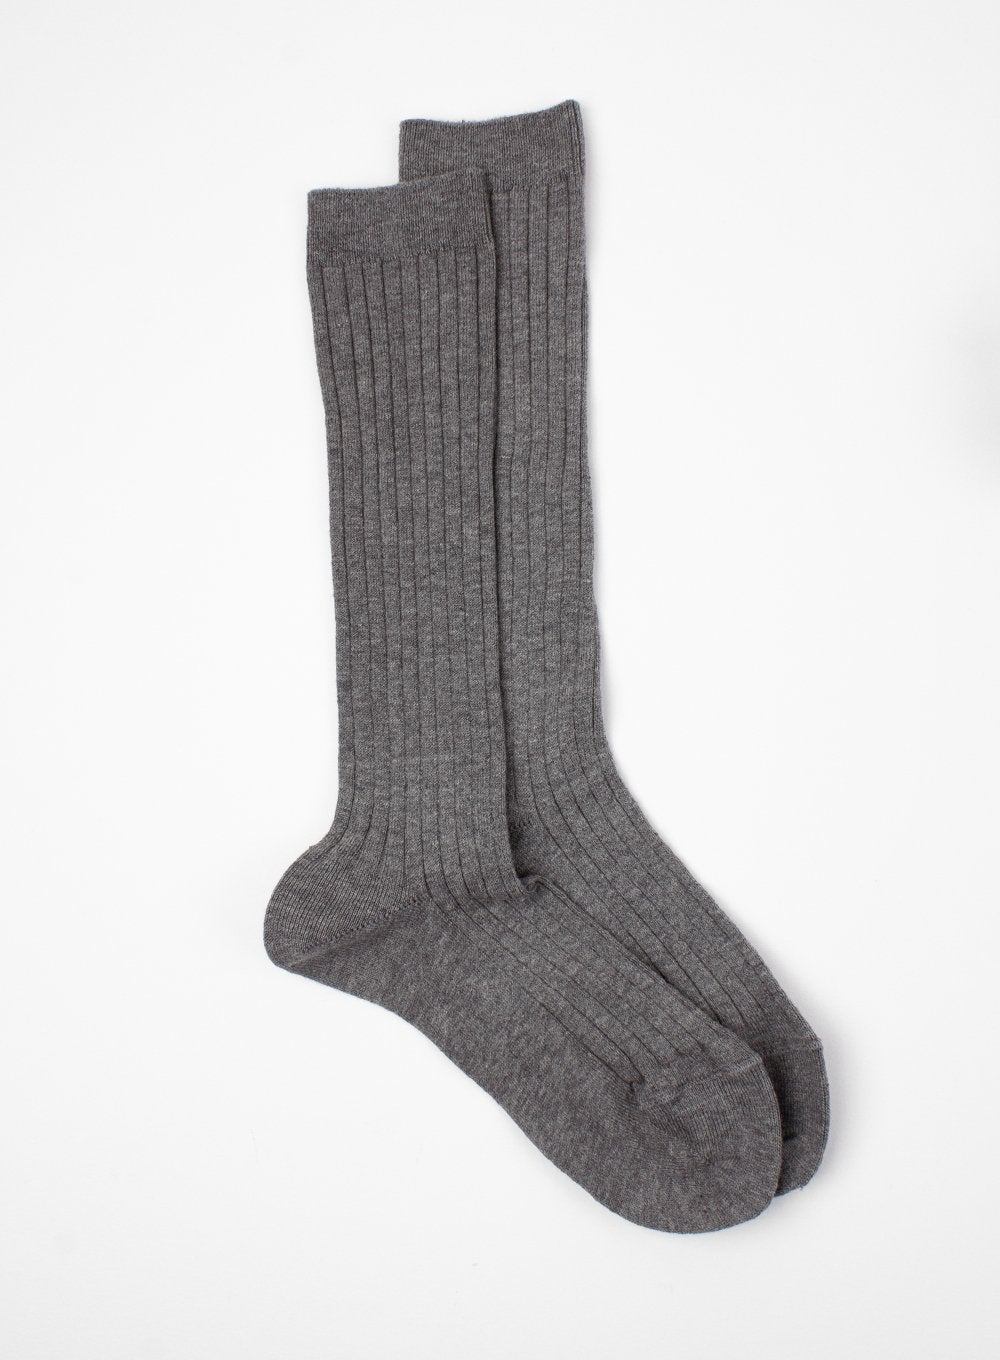 Ribbed Knee High Socks in Grey | Trotters Childrenswear – Trotters ...